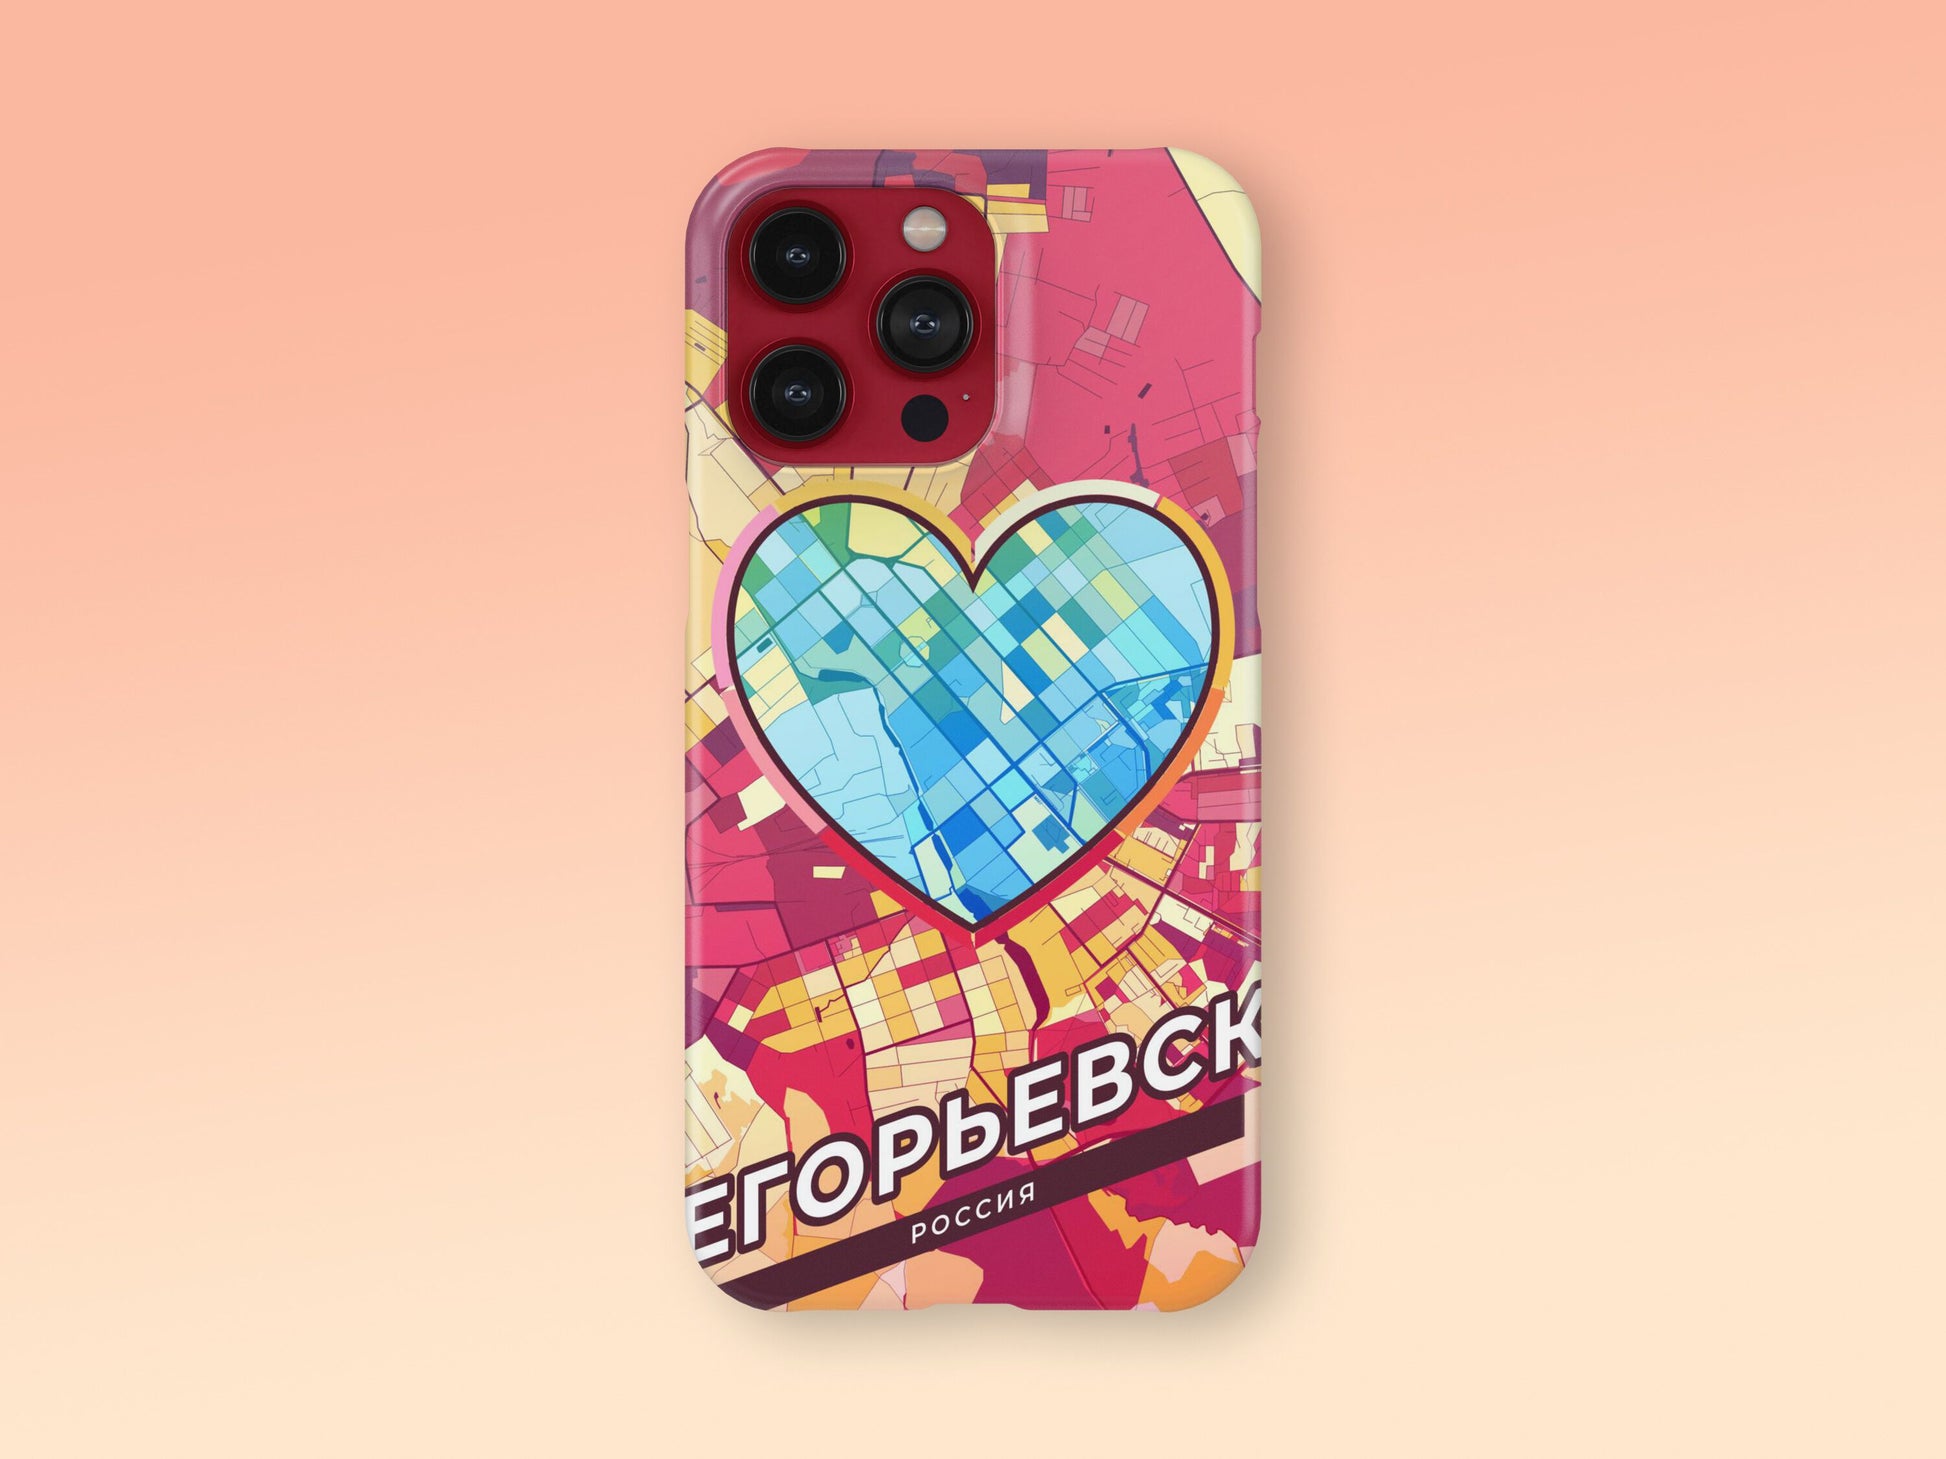 Yegoryevsk Russia slim phone case with colorful icon 2